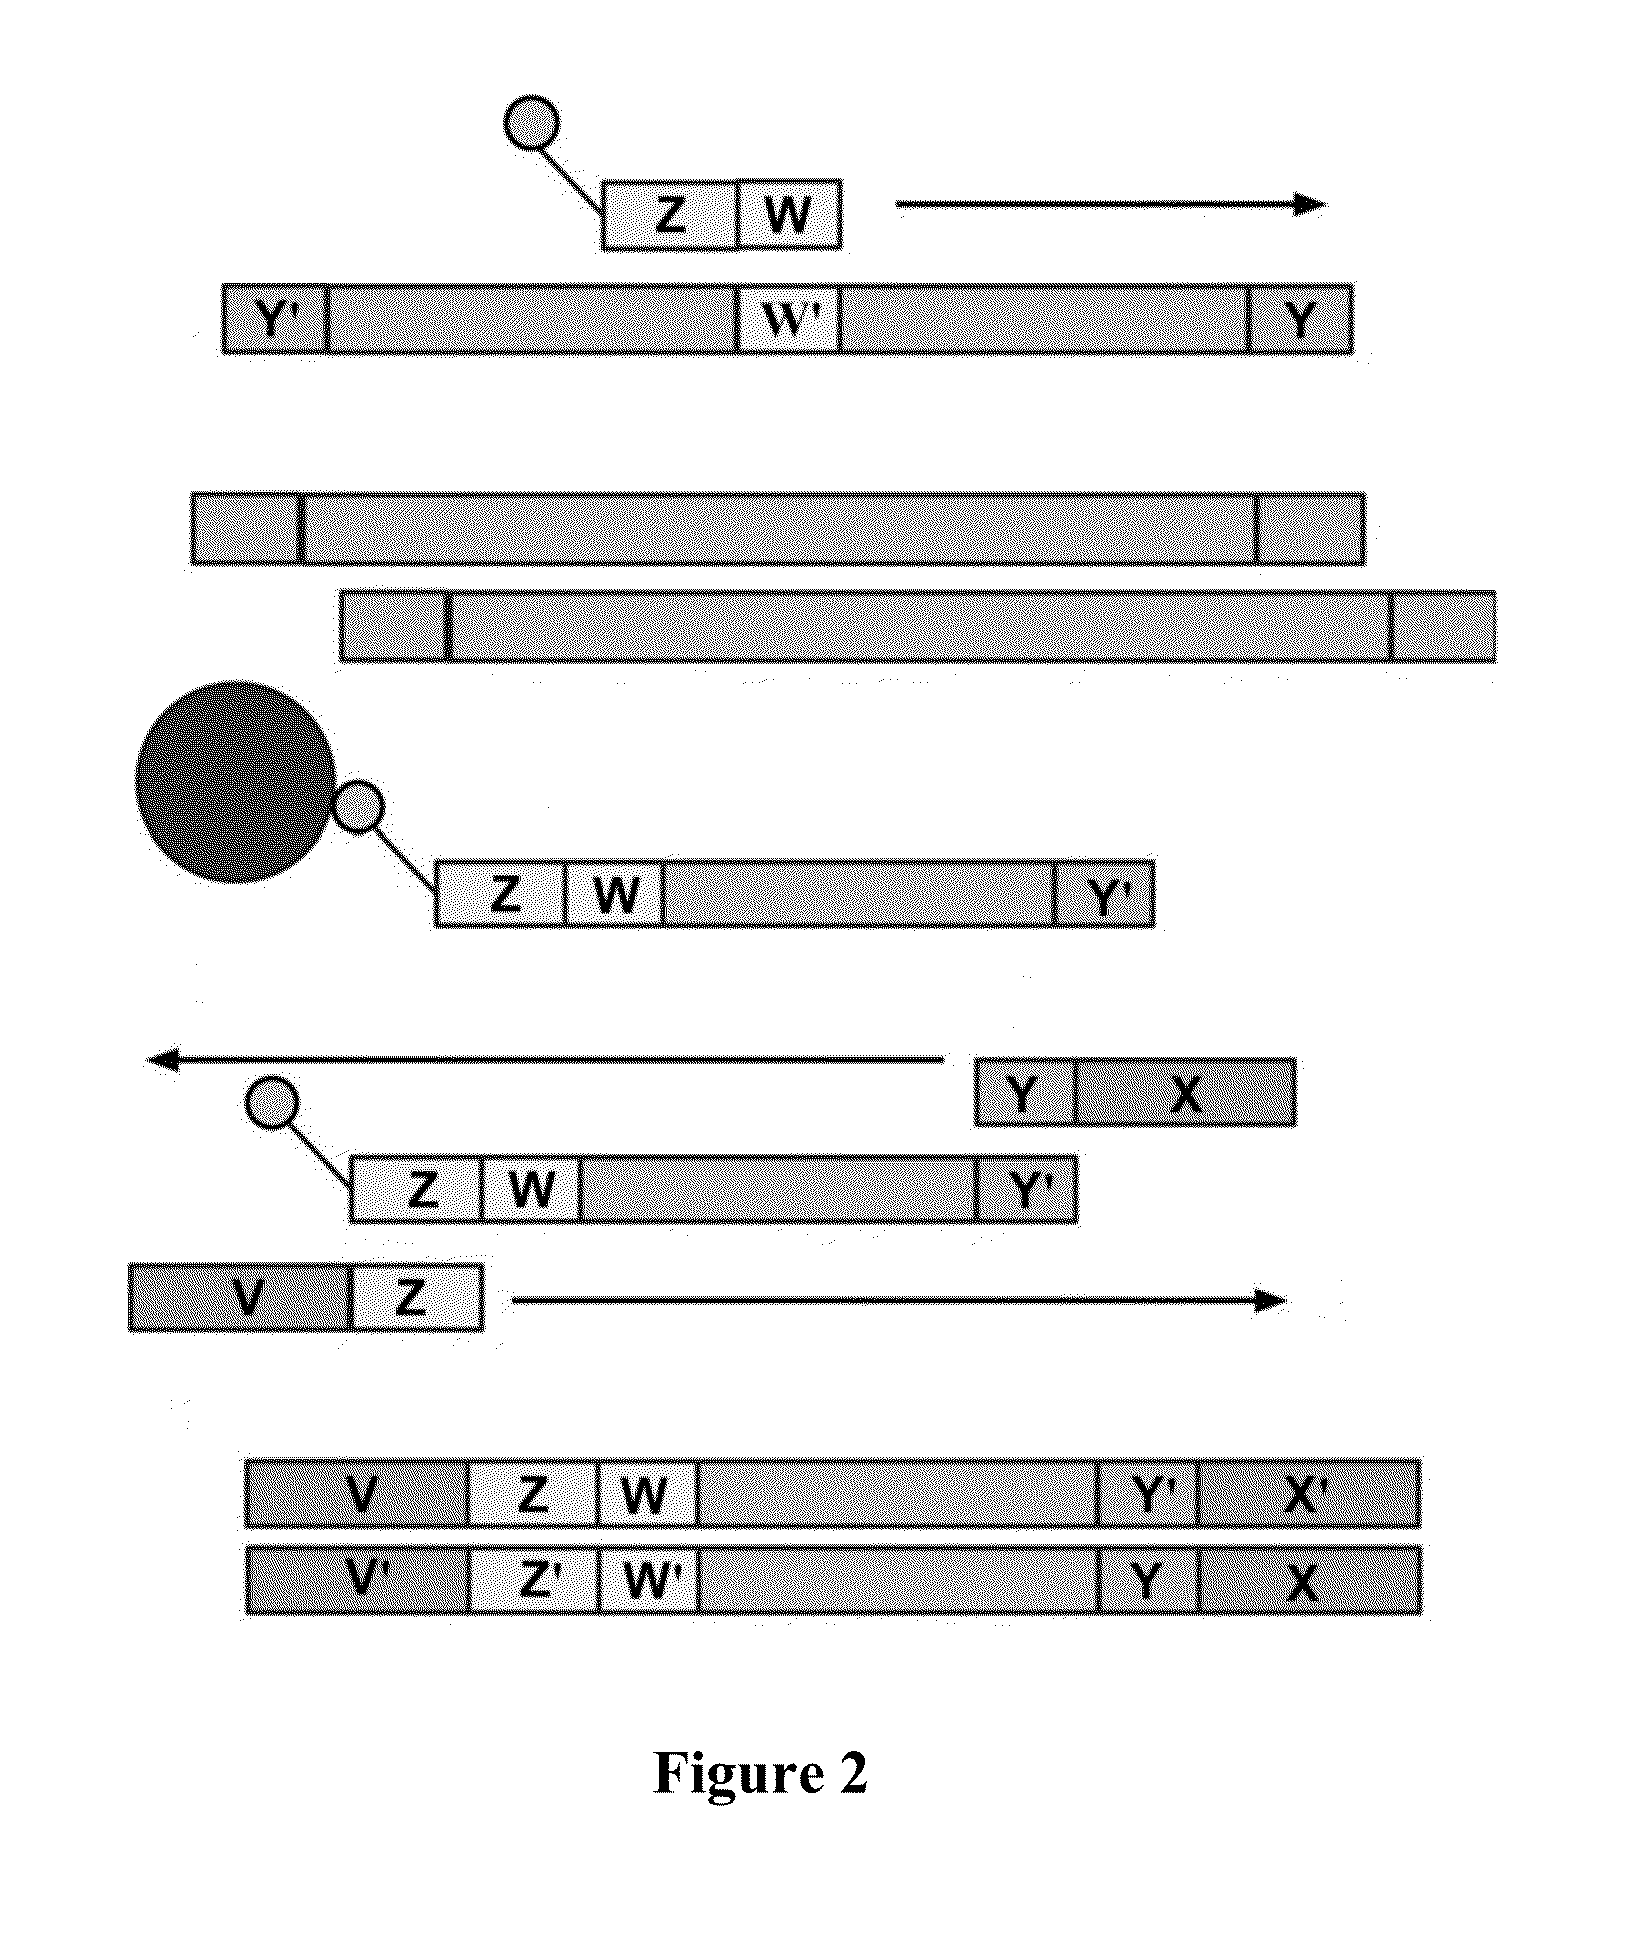 Methods and compositions for enrichment of target polynucleotides